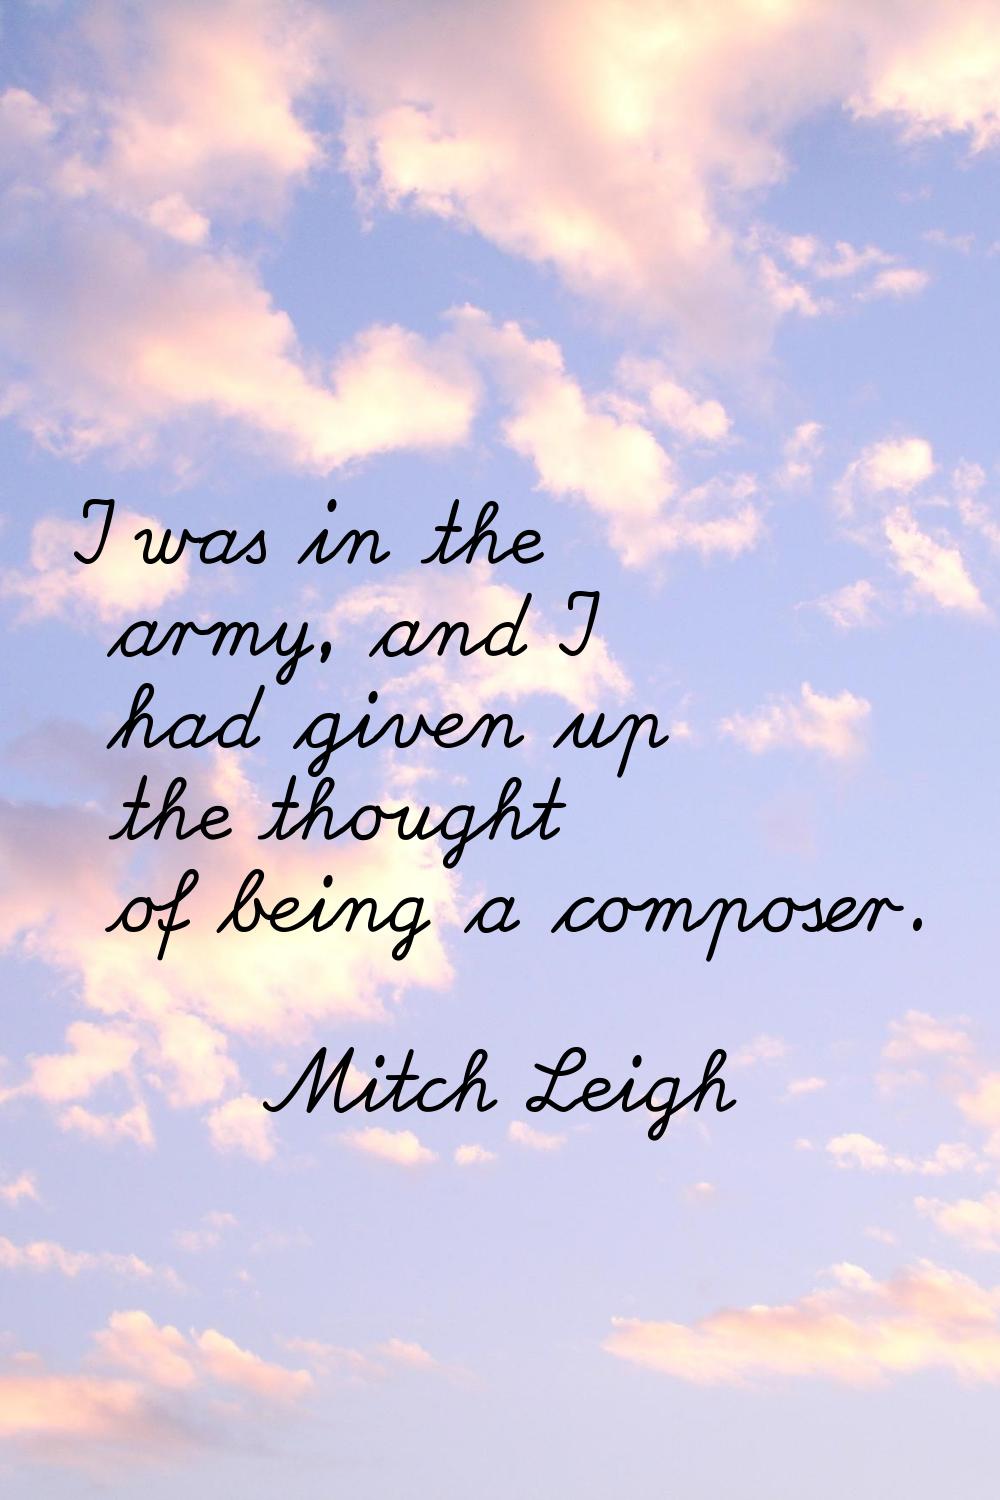 I was in the army, and I had given up the thought of being a composer.